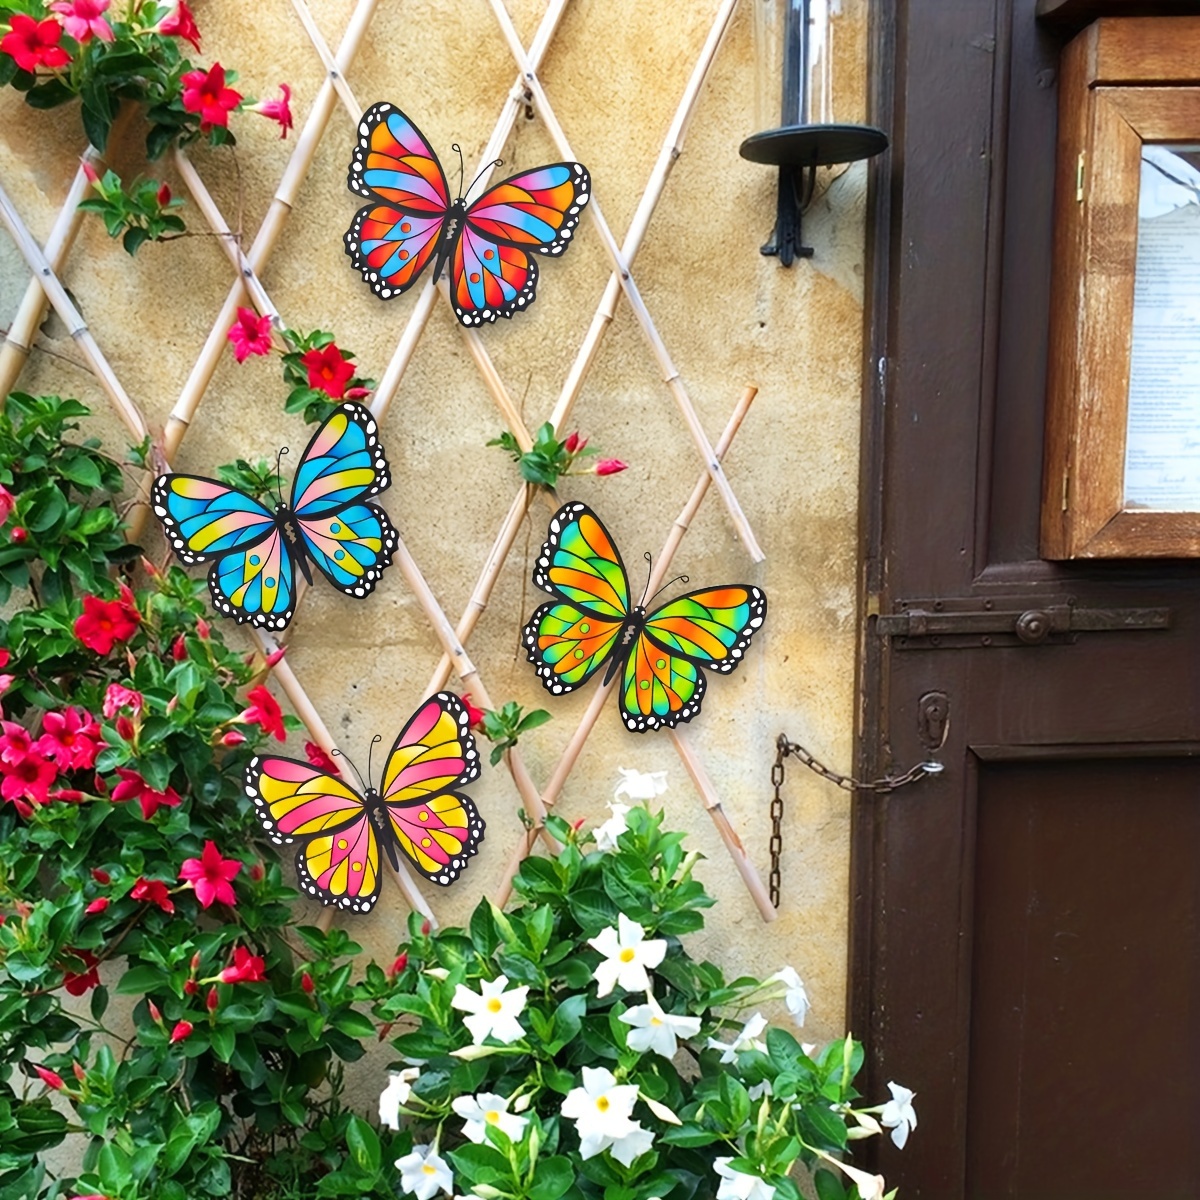 

4pcs Colorful Metal Butterfly Wall Decor, Outdoor Wall Art, Decorative For Indoor And Outdoor Garden Fence Housewarming Gift For Parents And Friends